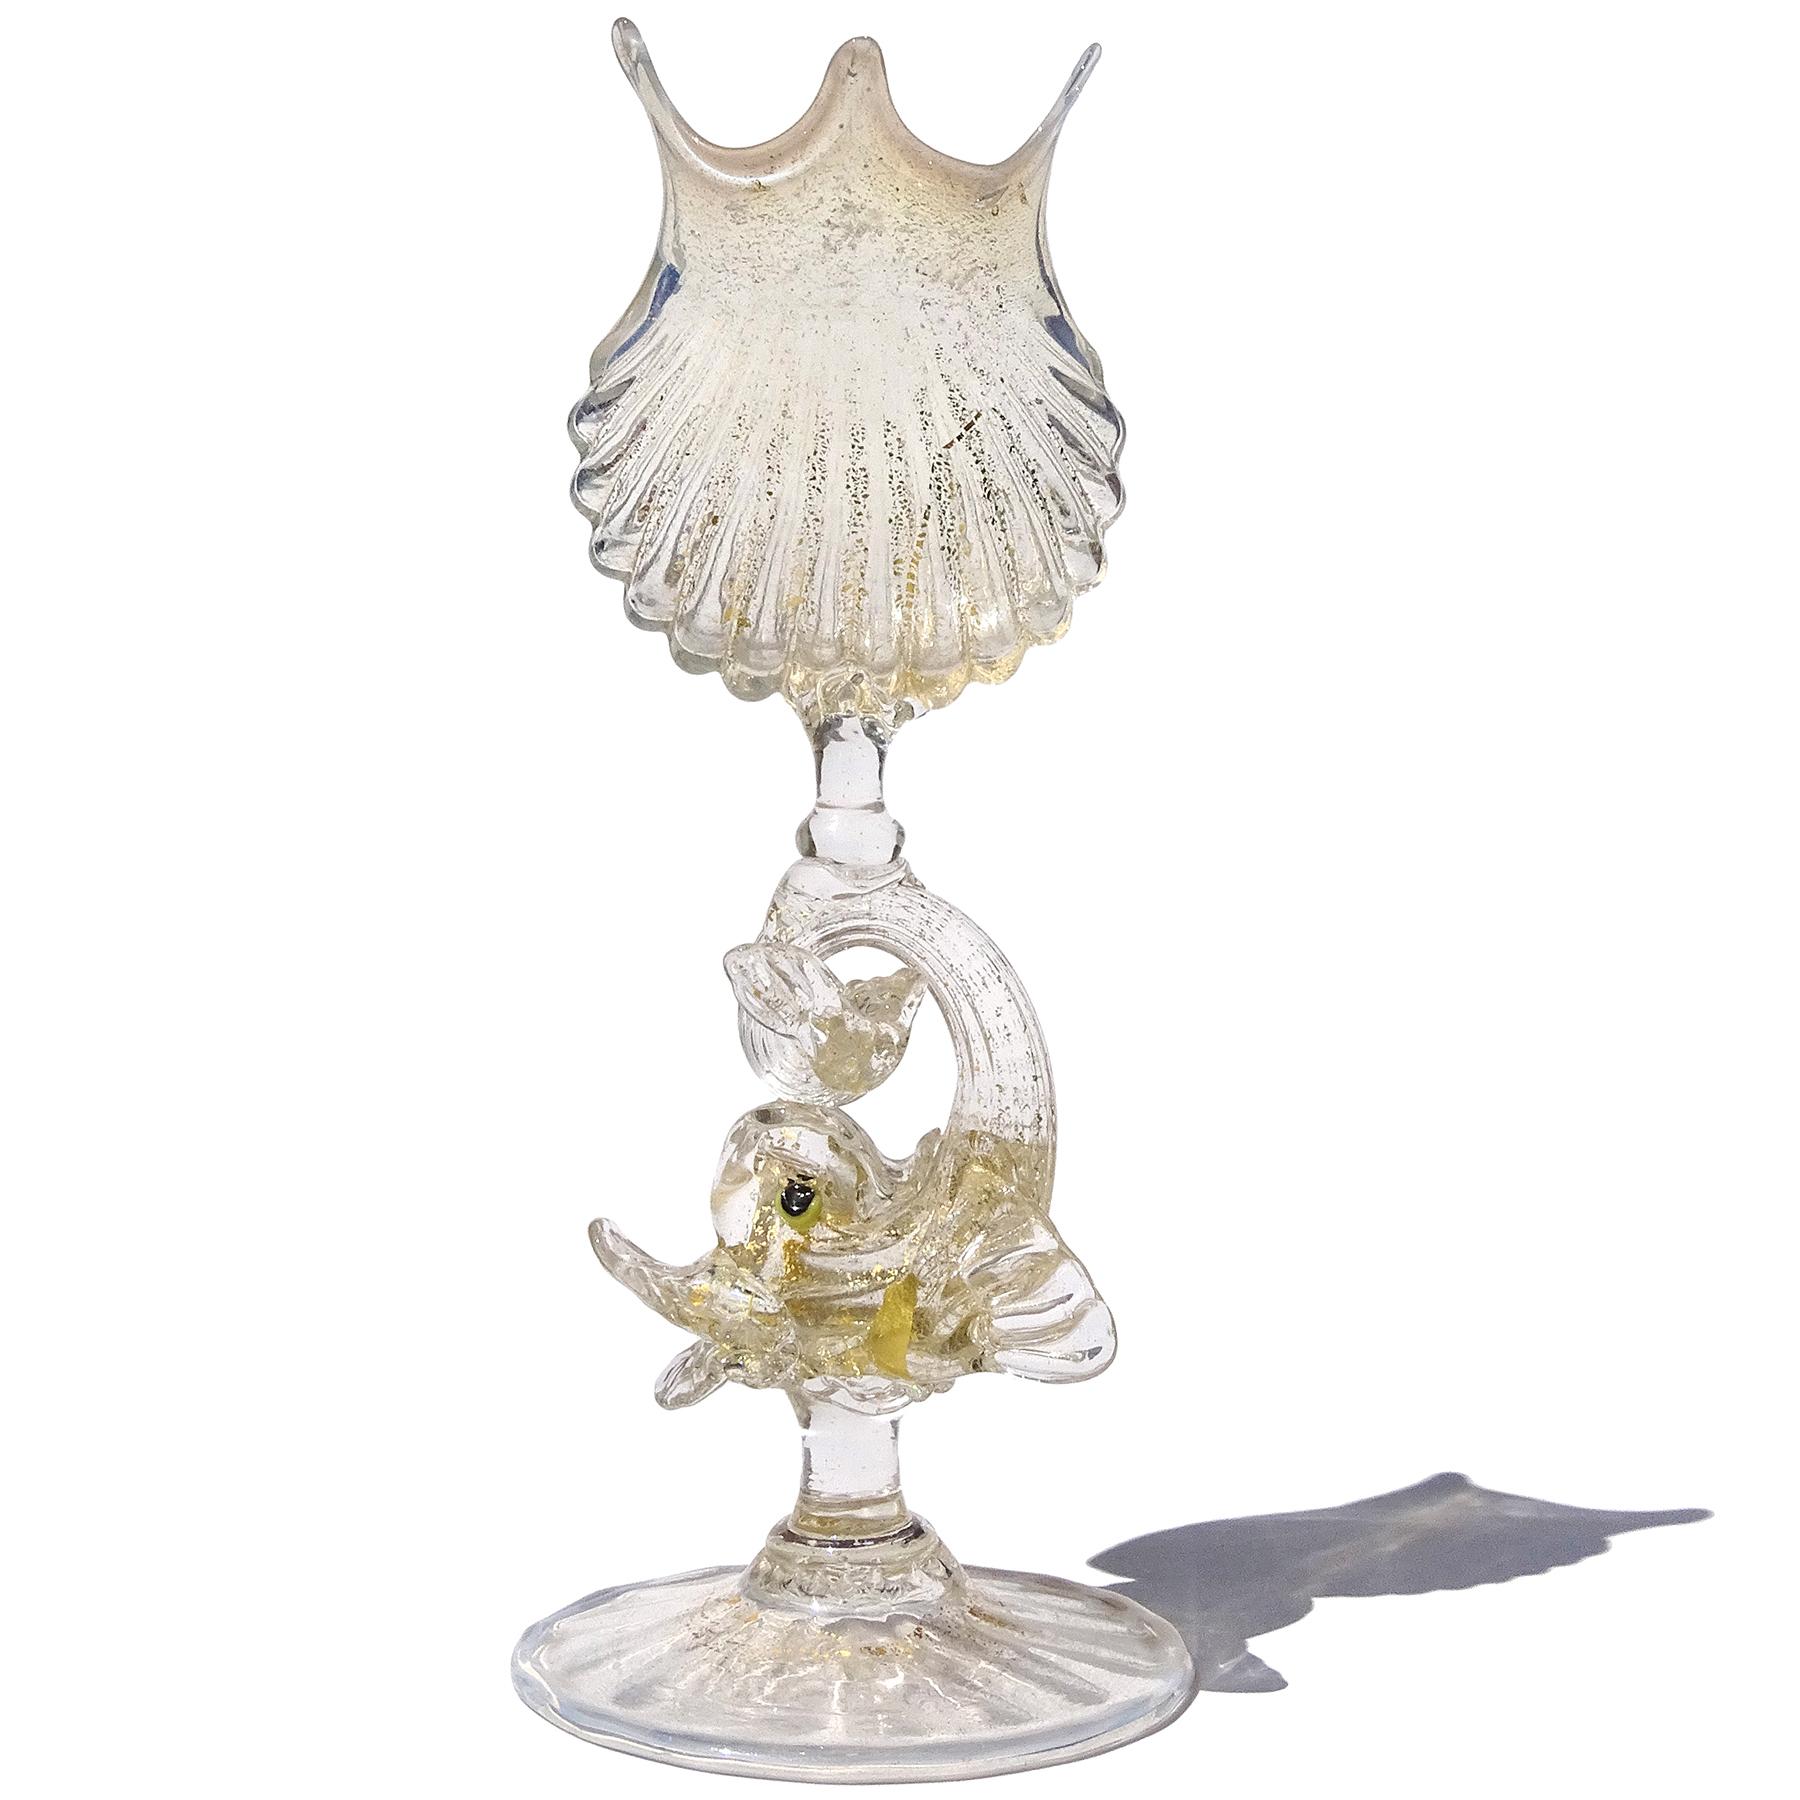 Beautiful, antique, early Venetian / Murano hand blown clear with opalescent and gold flecks Italian art glass with ornate seashell decoration, fish stem vase / table object. Created in the manner of the Salviati and Fratelli Toso companies. The